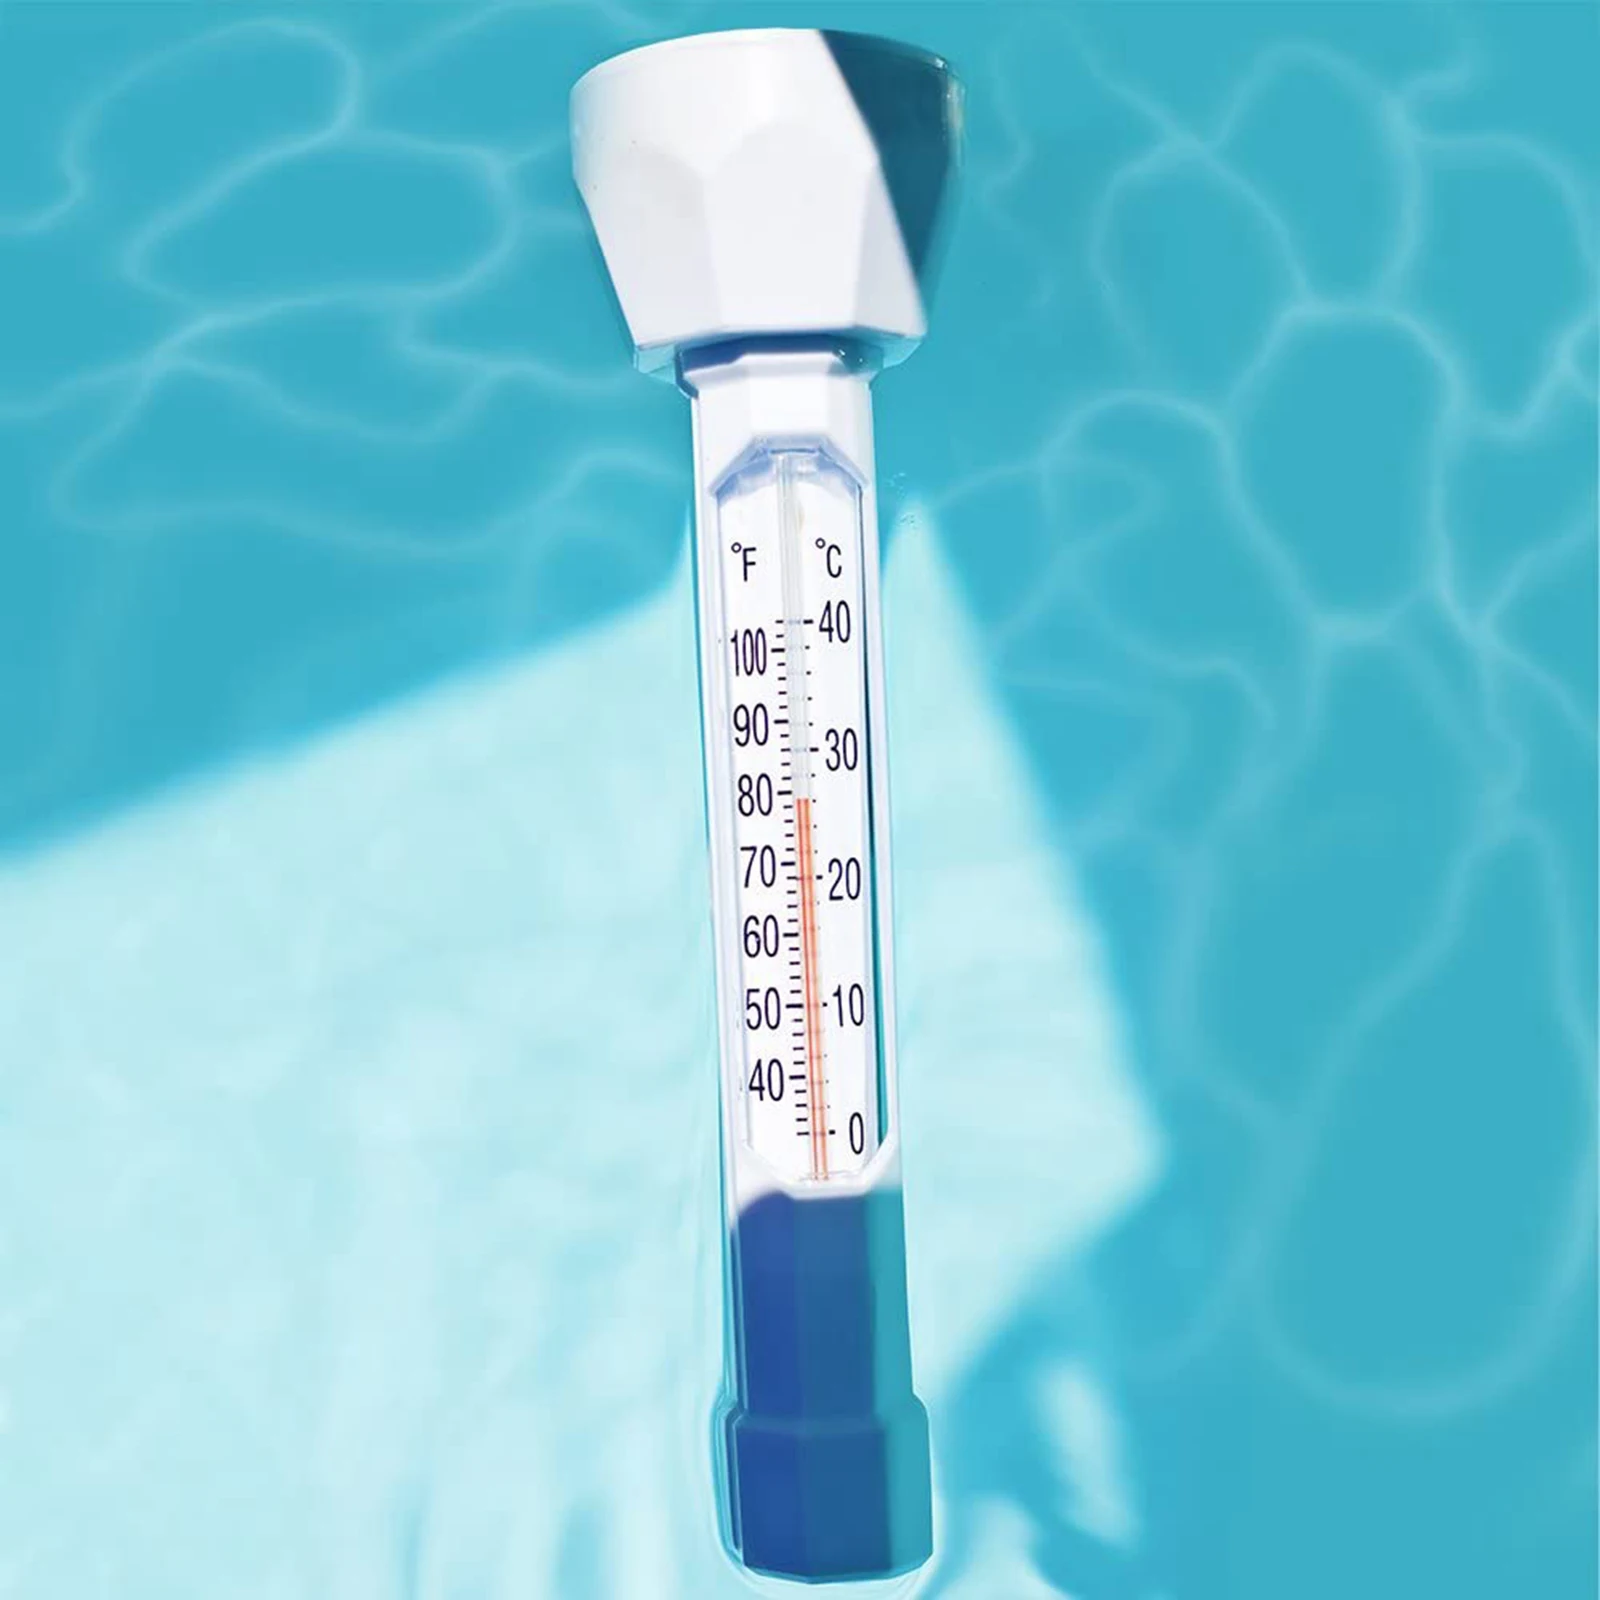 Large Swimming Pool Thermometer, Fish Pond Spa Water Temperature Test Tube Thermometer for Outdoor Indoor Swimming Pools